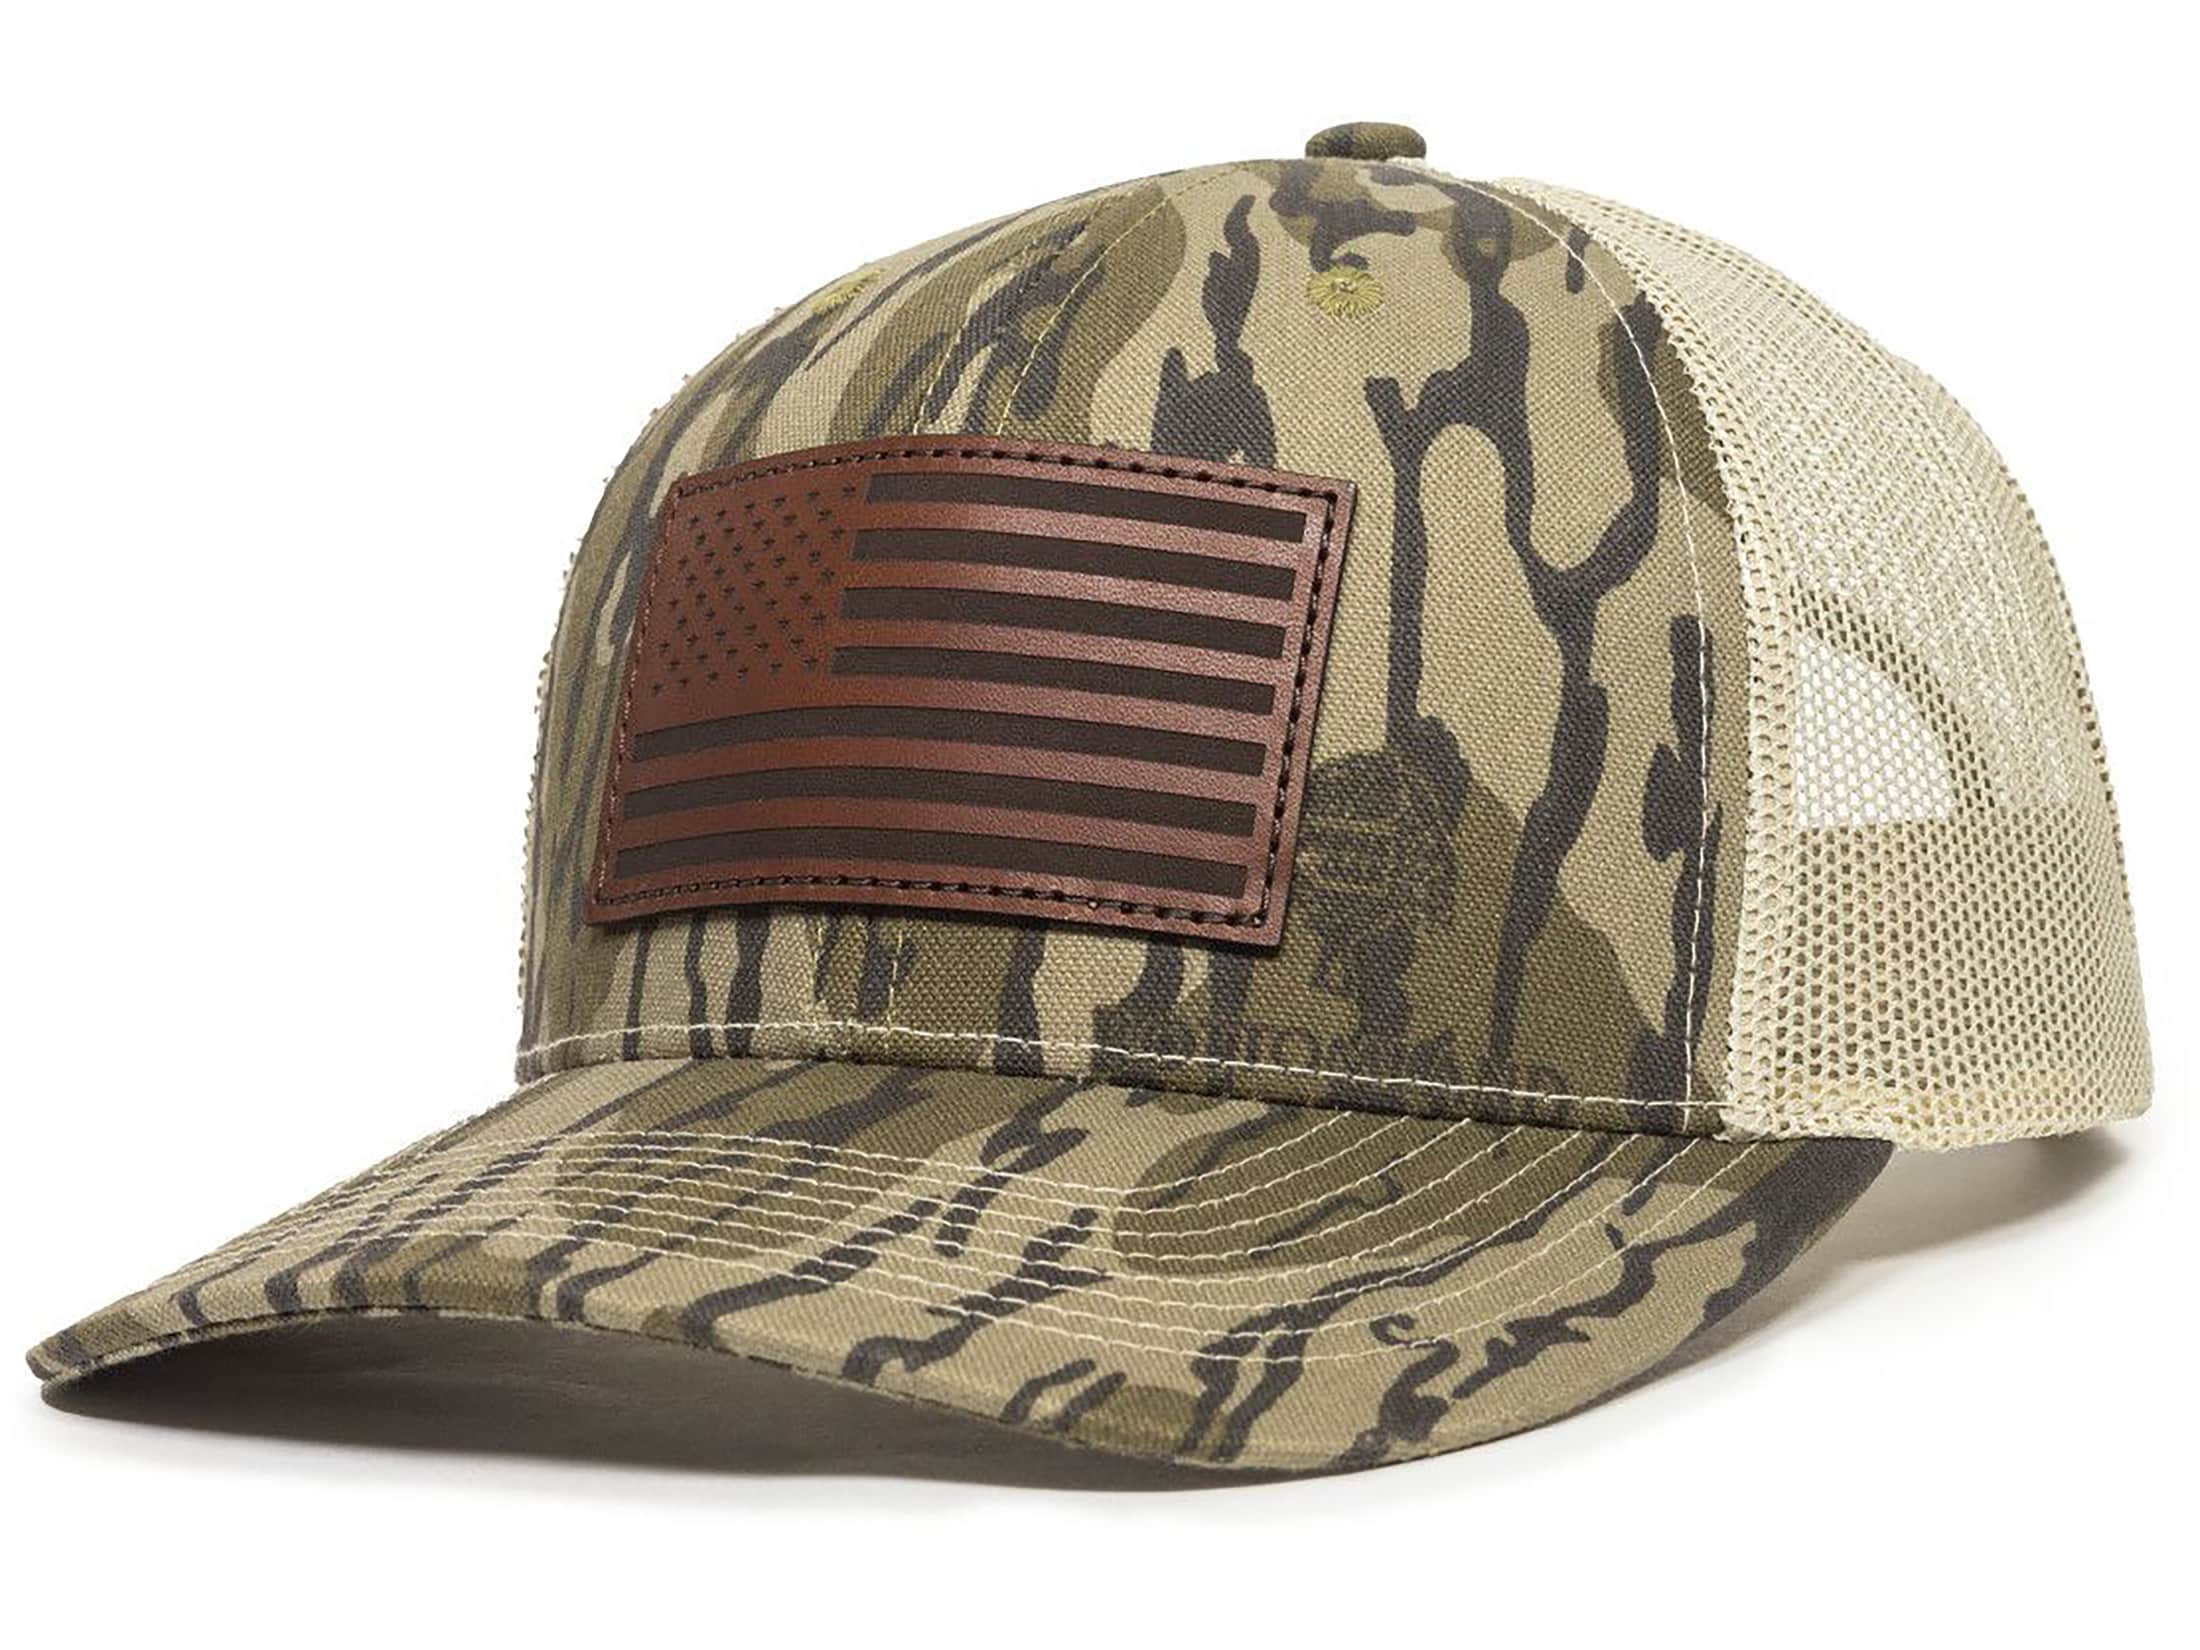 Mossy Oak Partners with Vapor Apparel to Offer Customizable Clothing Line  Made in the USA